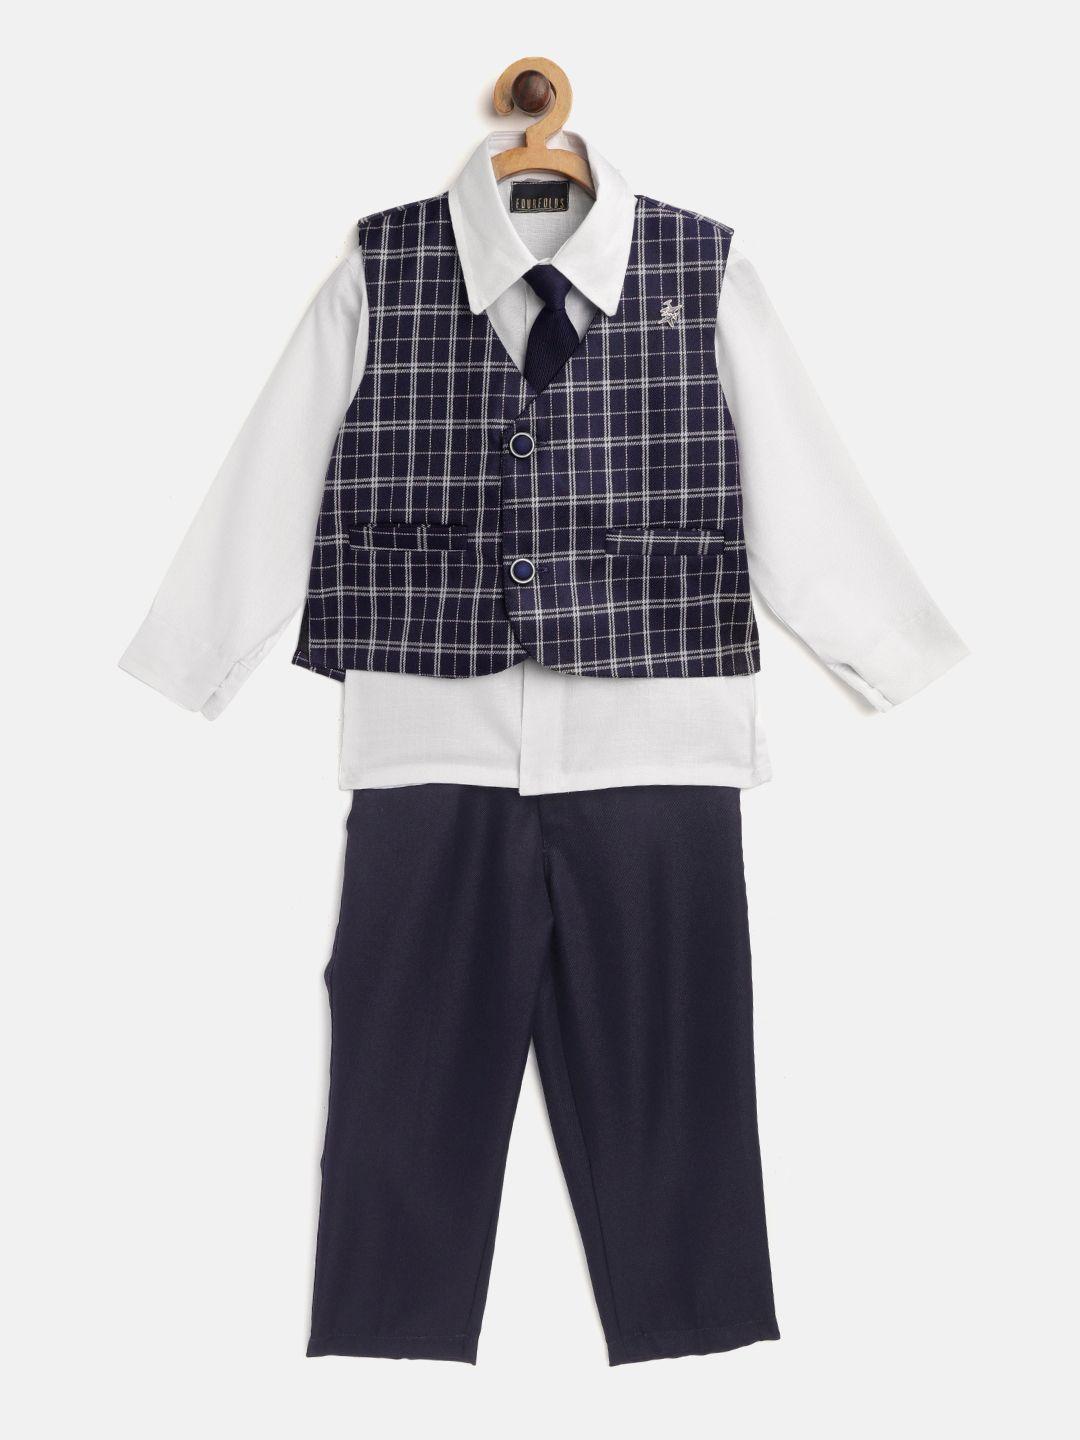 fourfolds-boys-white-&-navy-blue-solid-clothing-set-with-waistcoat-&-tie